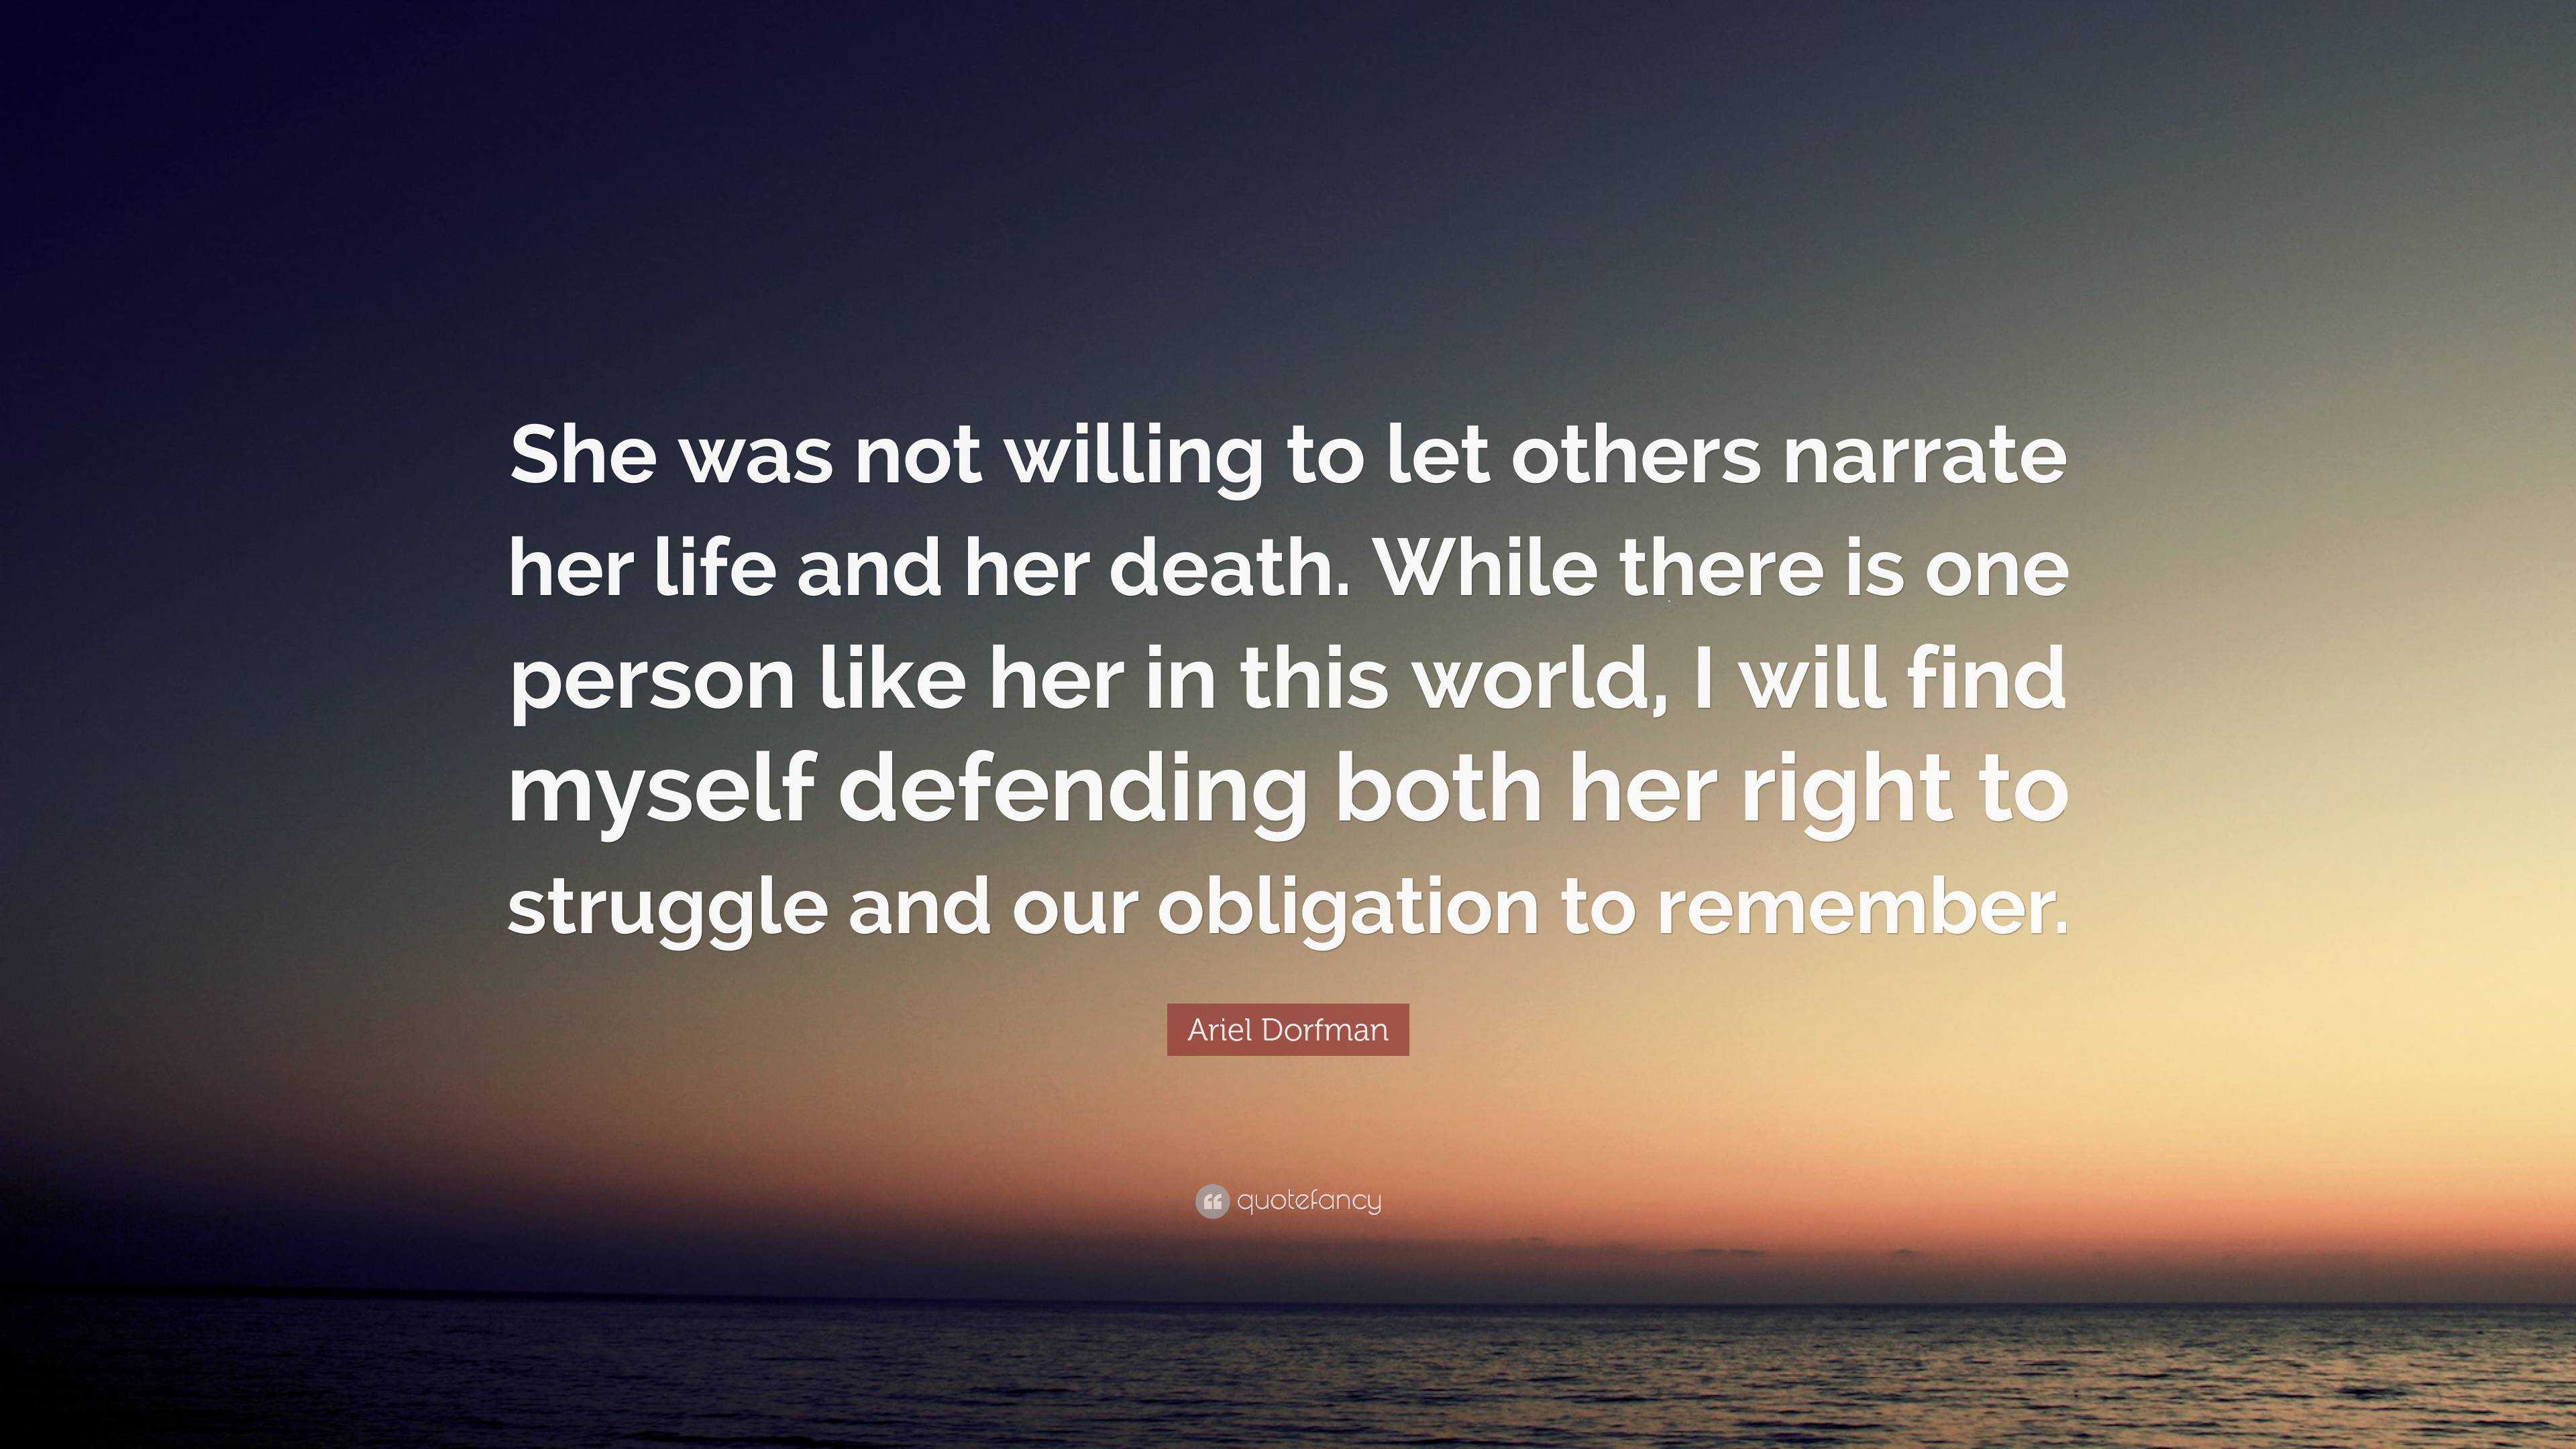 Ariel Dorfman Quote: “She was not willing to let others narrate her ...